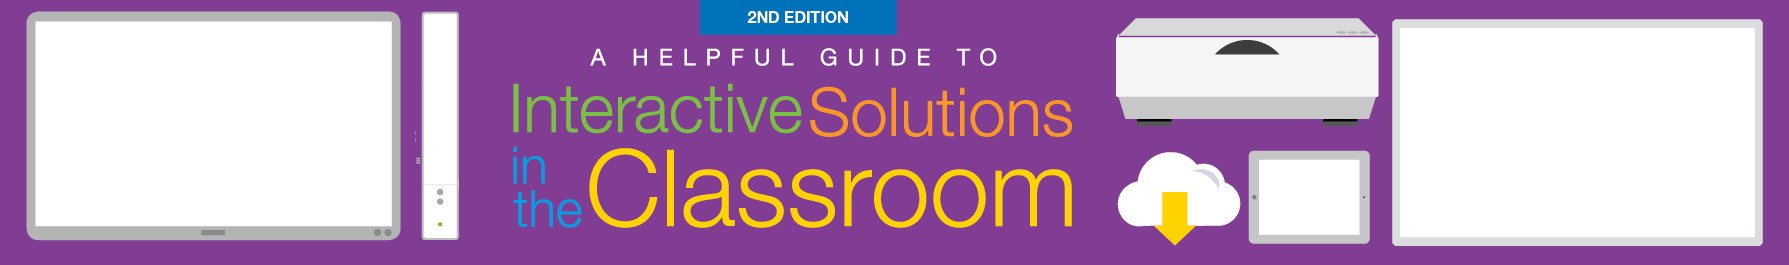 Whole-Class Learning Solutions Guide